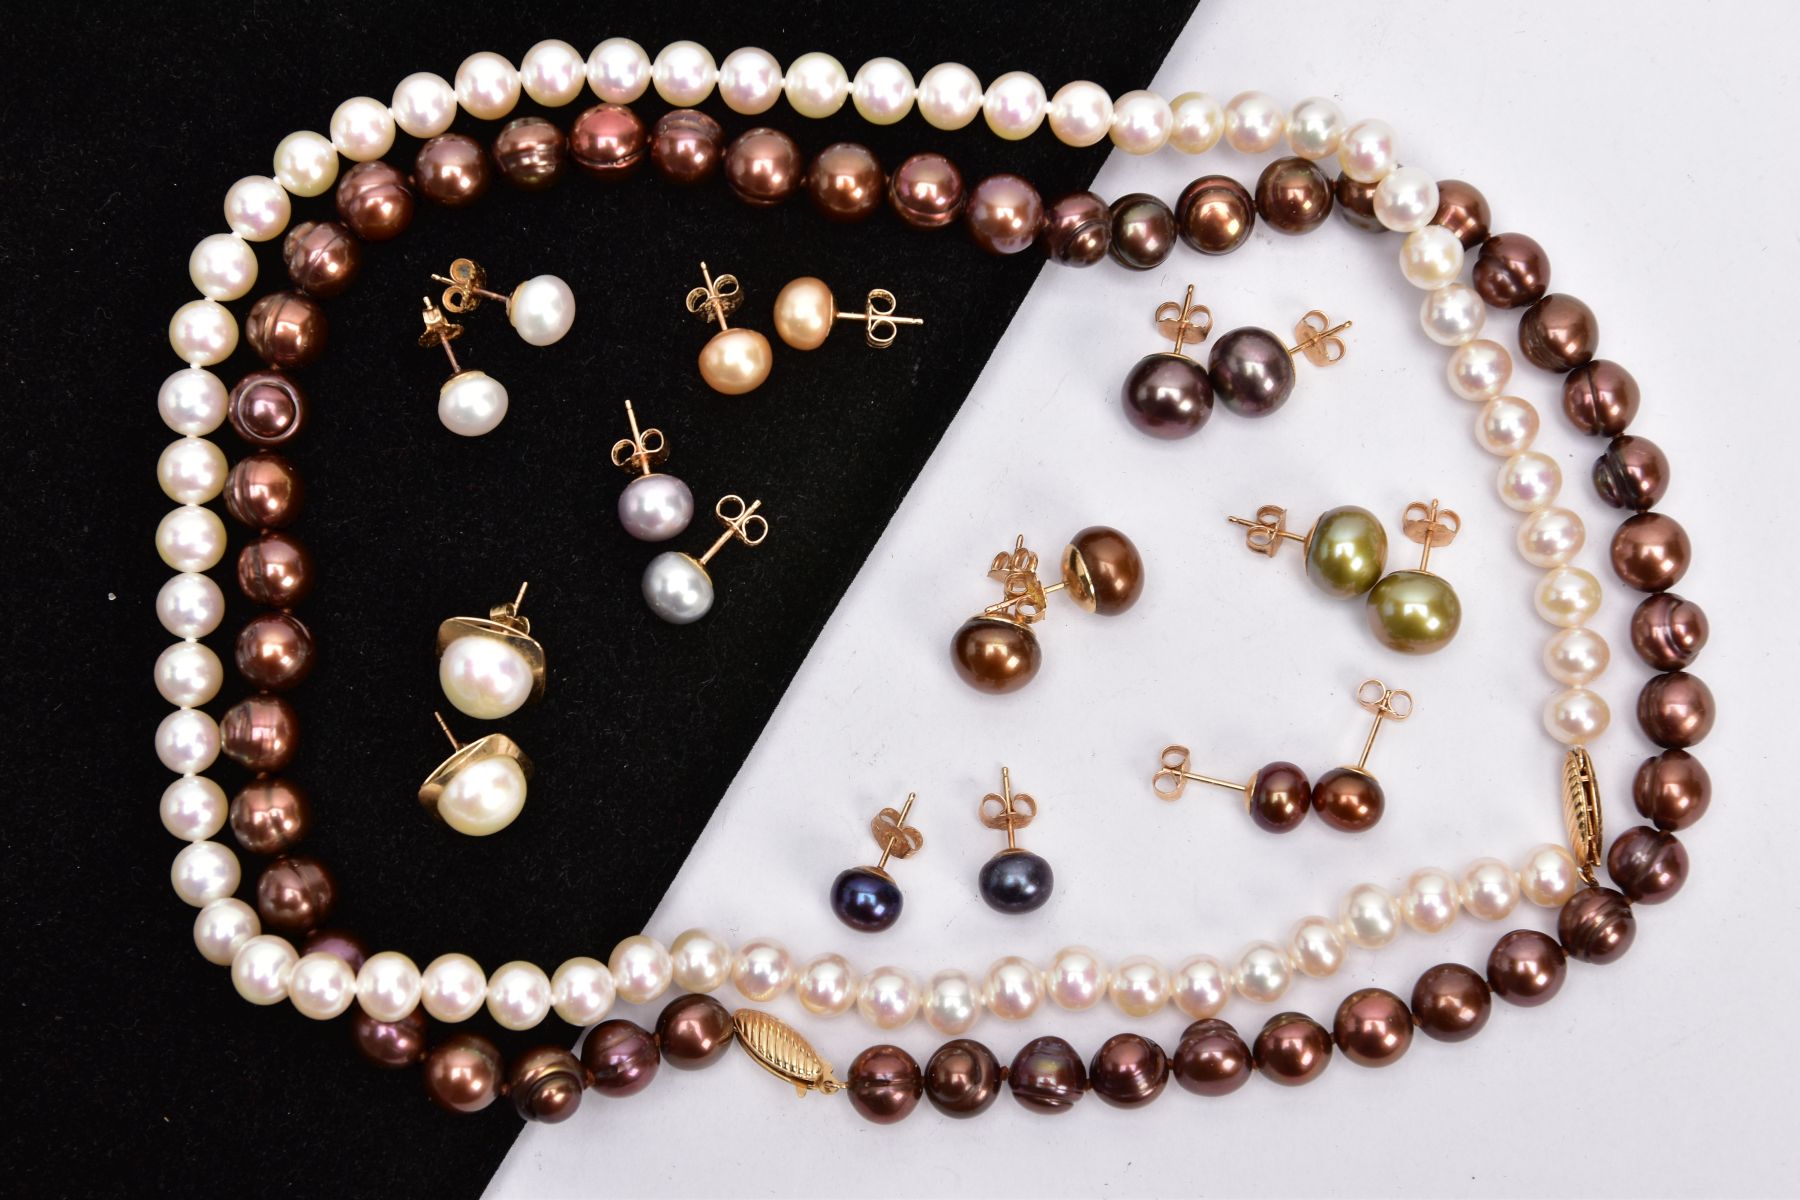 TWO CULTURED PEARL NECKLACES AND NINE PAIRS OF CULTURED PEARL EARRINGS, the first necklace